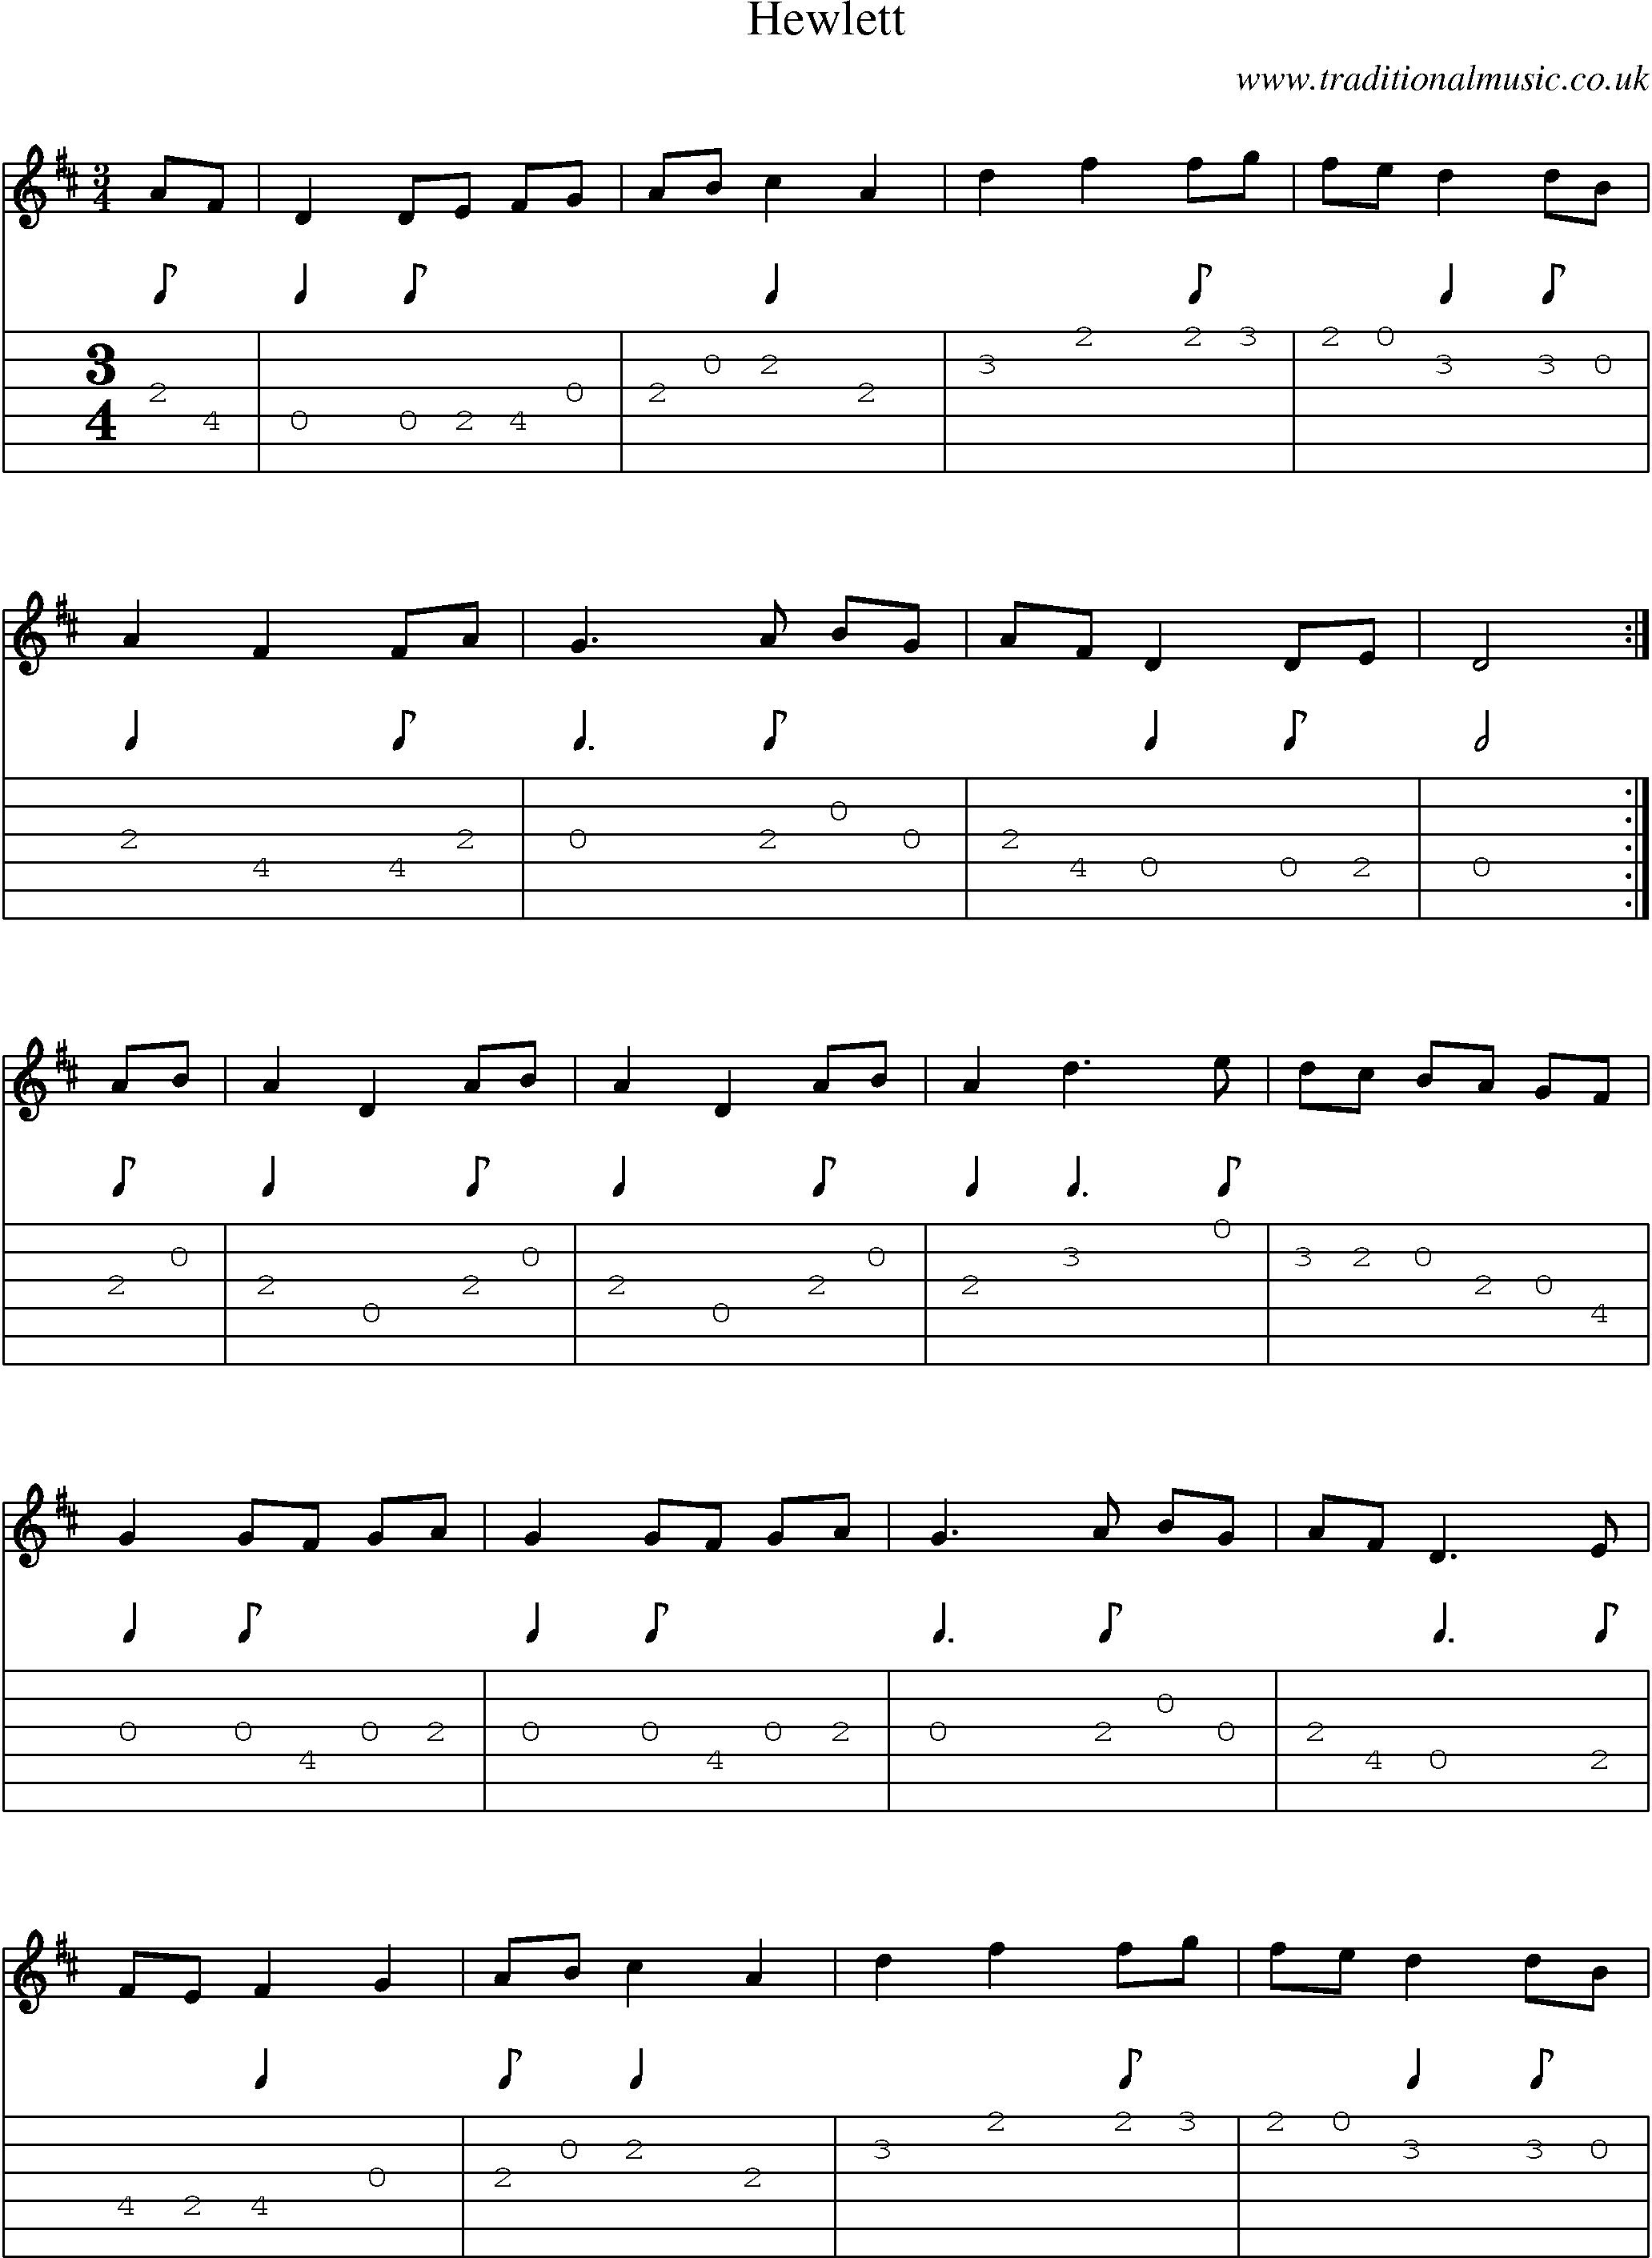 Music Score and Guitar Tabs for Hewlett